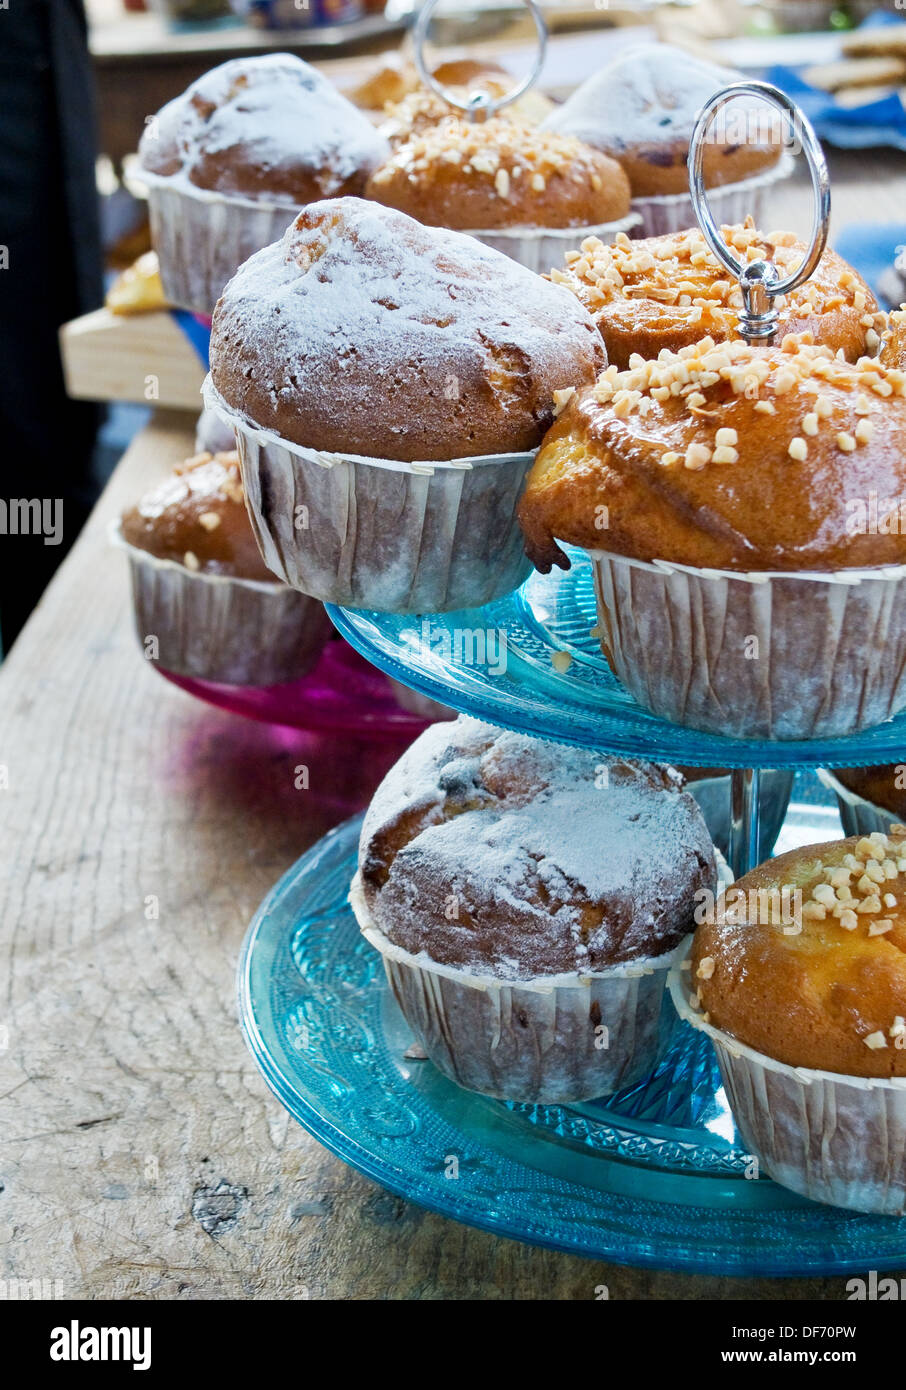 Muffins in a vintage tier cake stand on a rustic table. Stock Photo